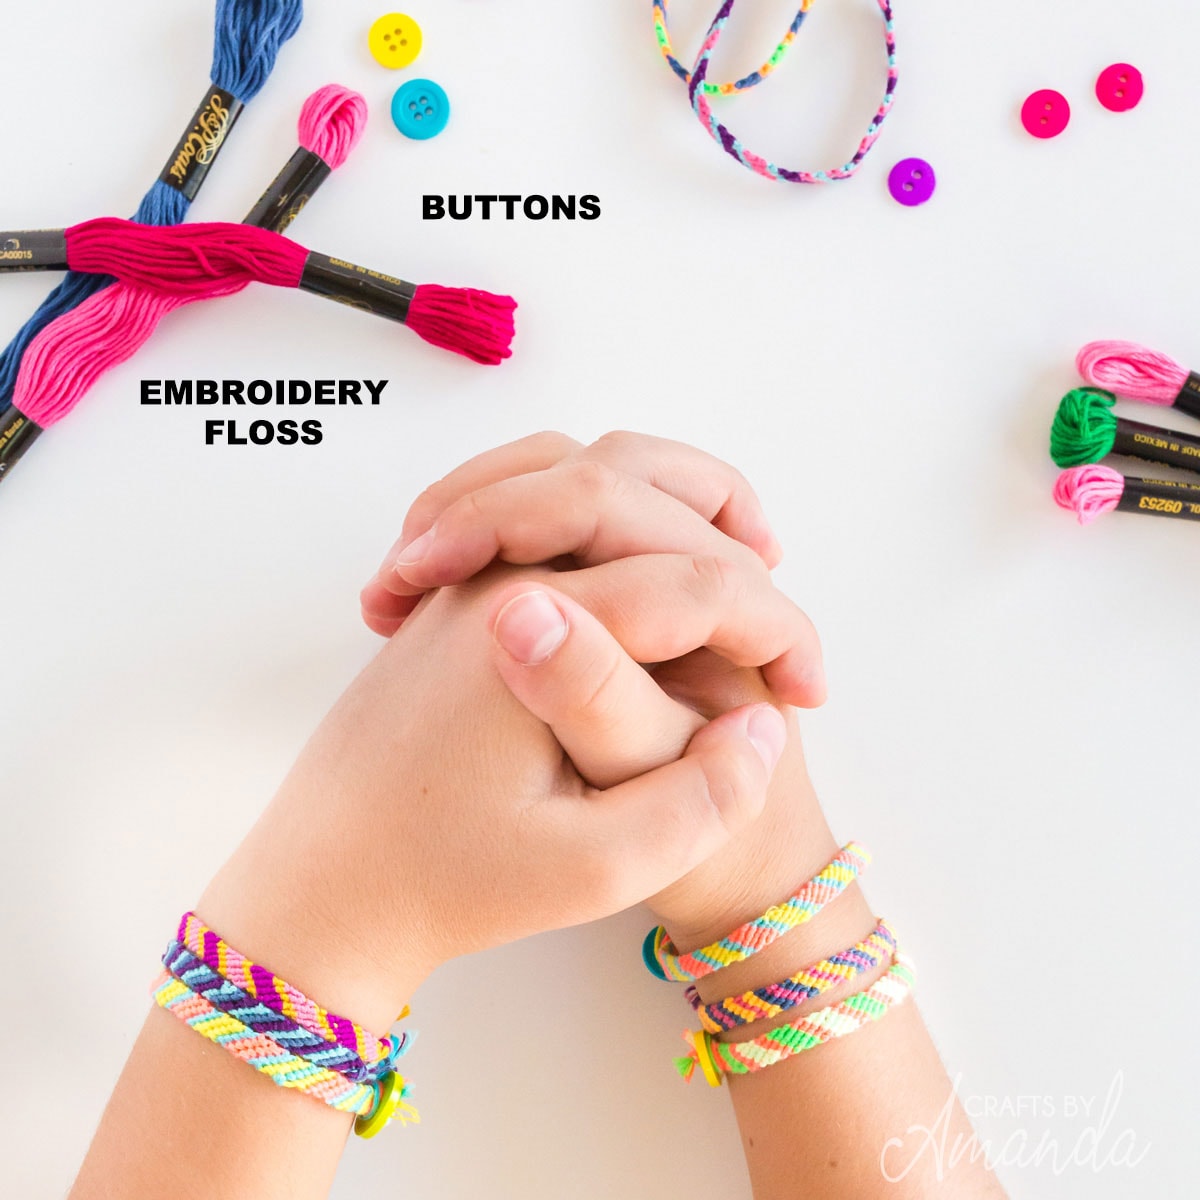 supplies for friendship bracelets and a girl's hands clasped together